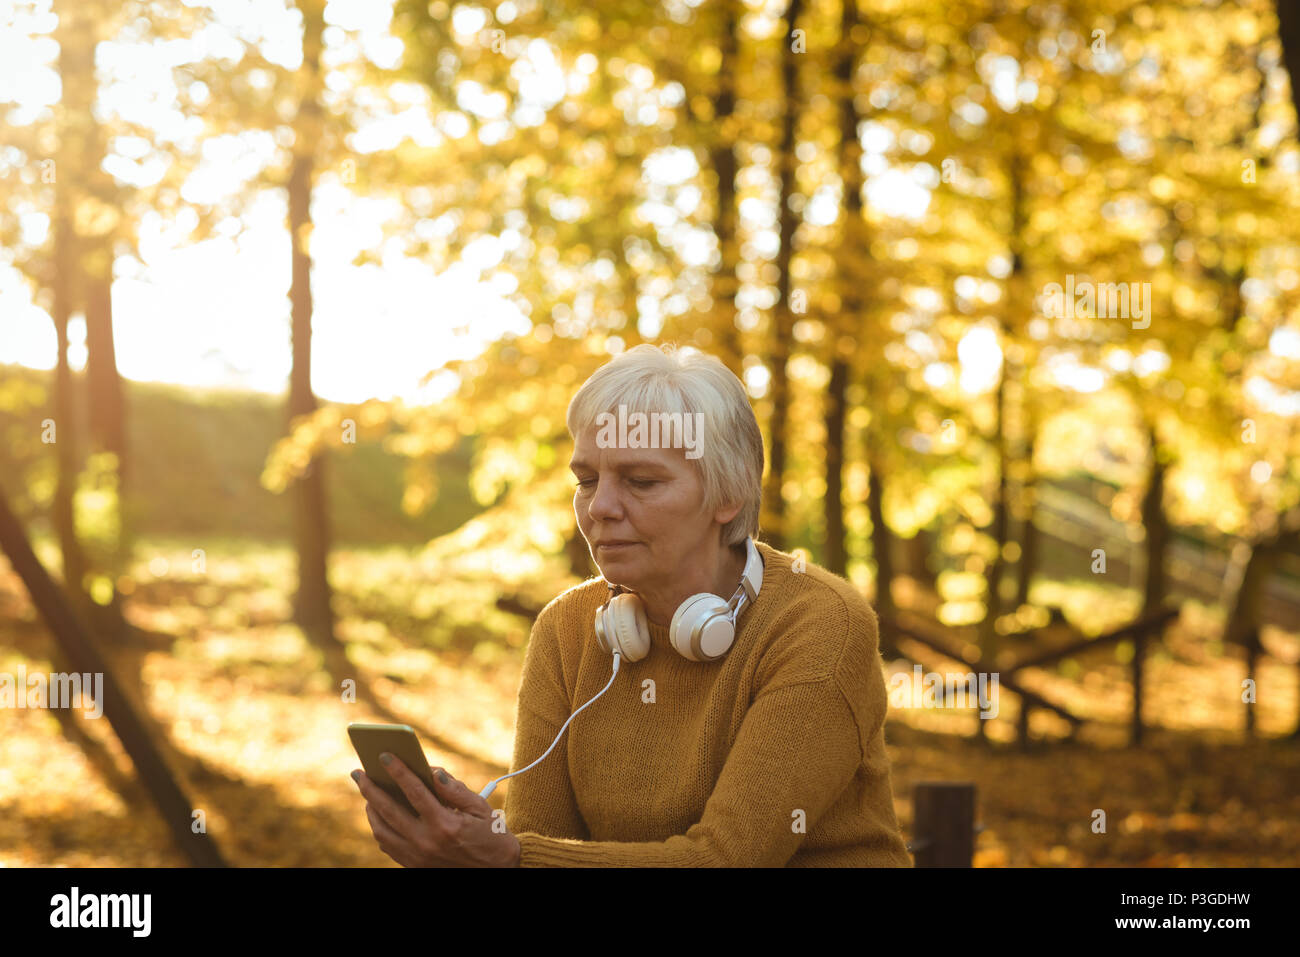 Senior woman using her mobile phone in the park Stock Photo